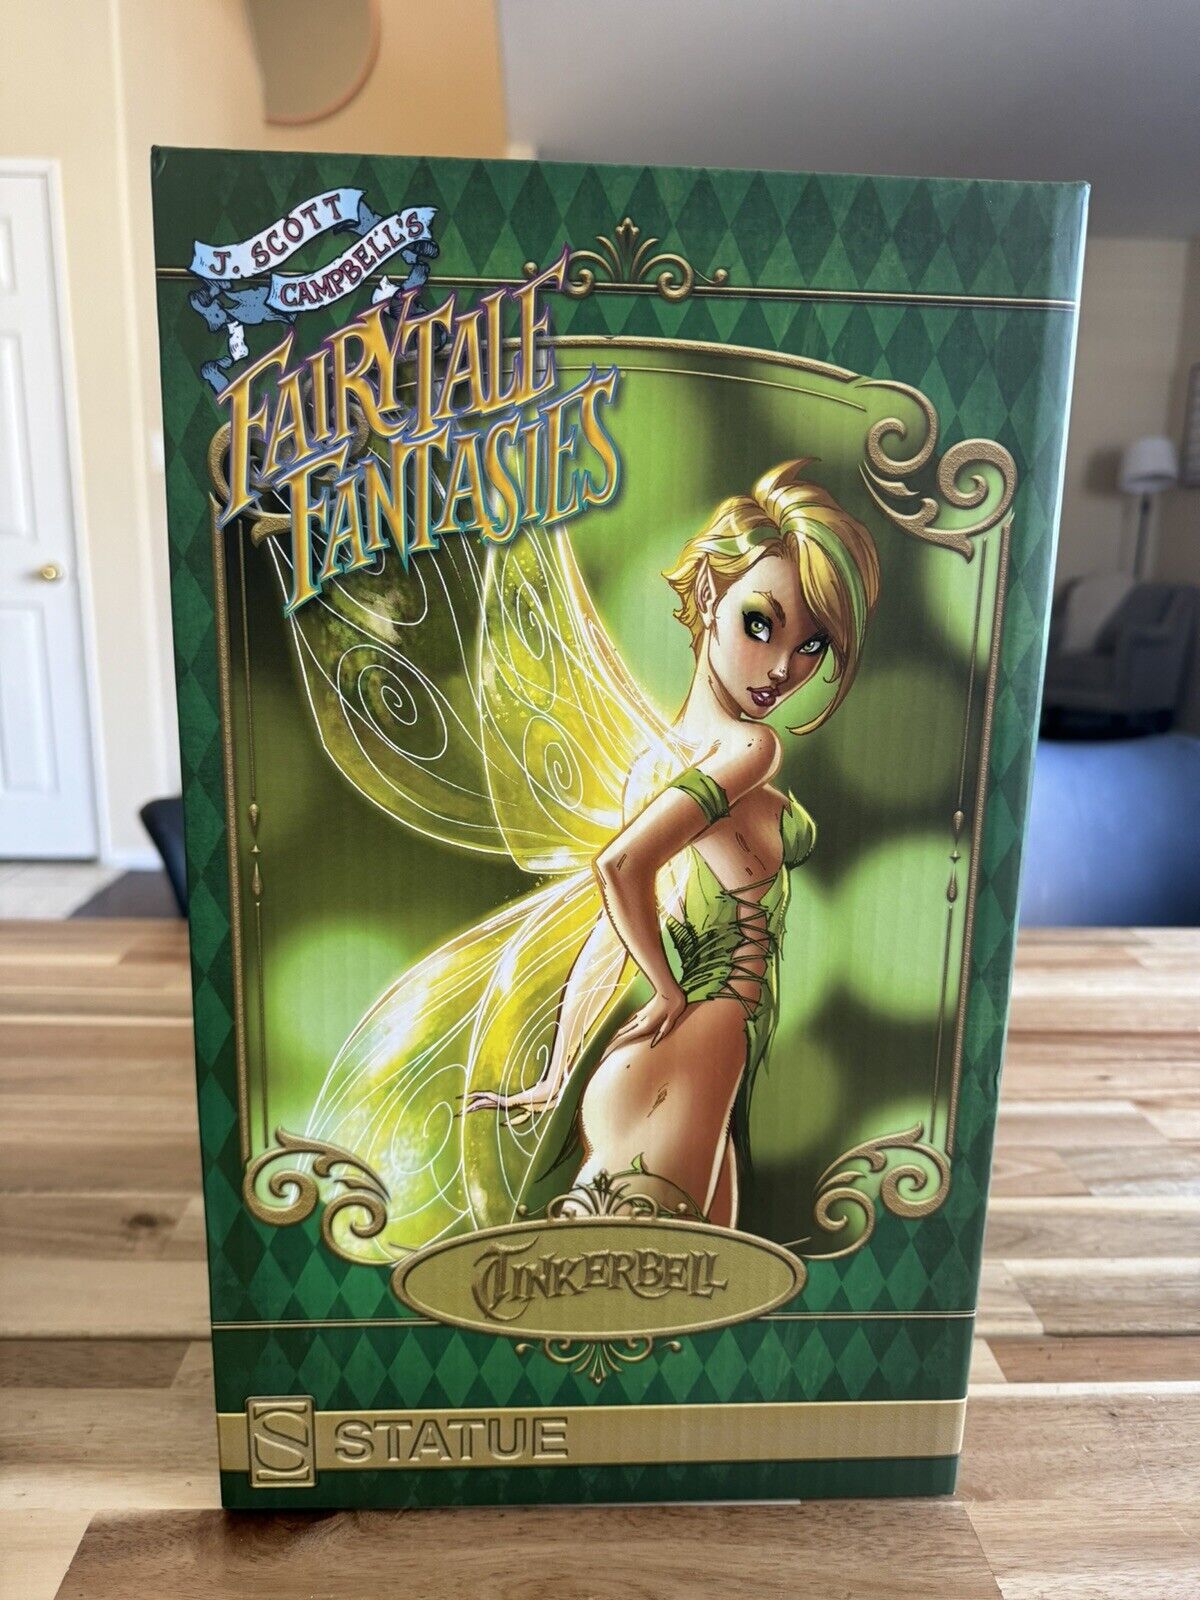 Sideshow Fairytale Fantasies Tinkerbell Statue by J Scott Campbell